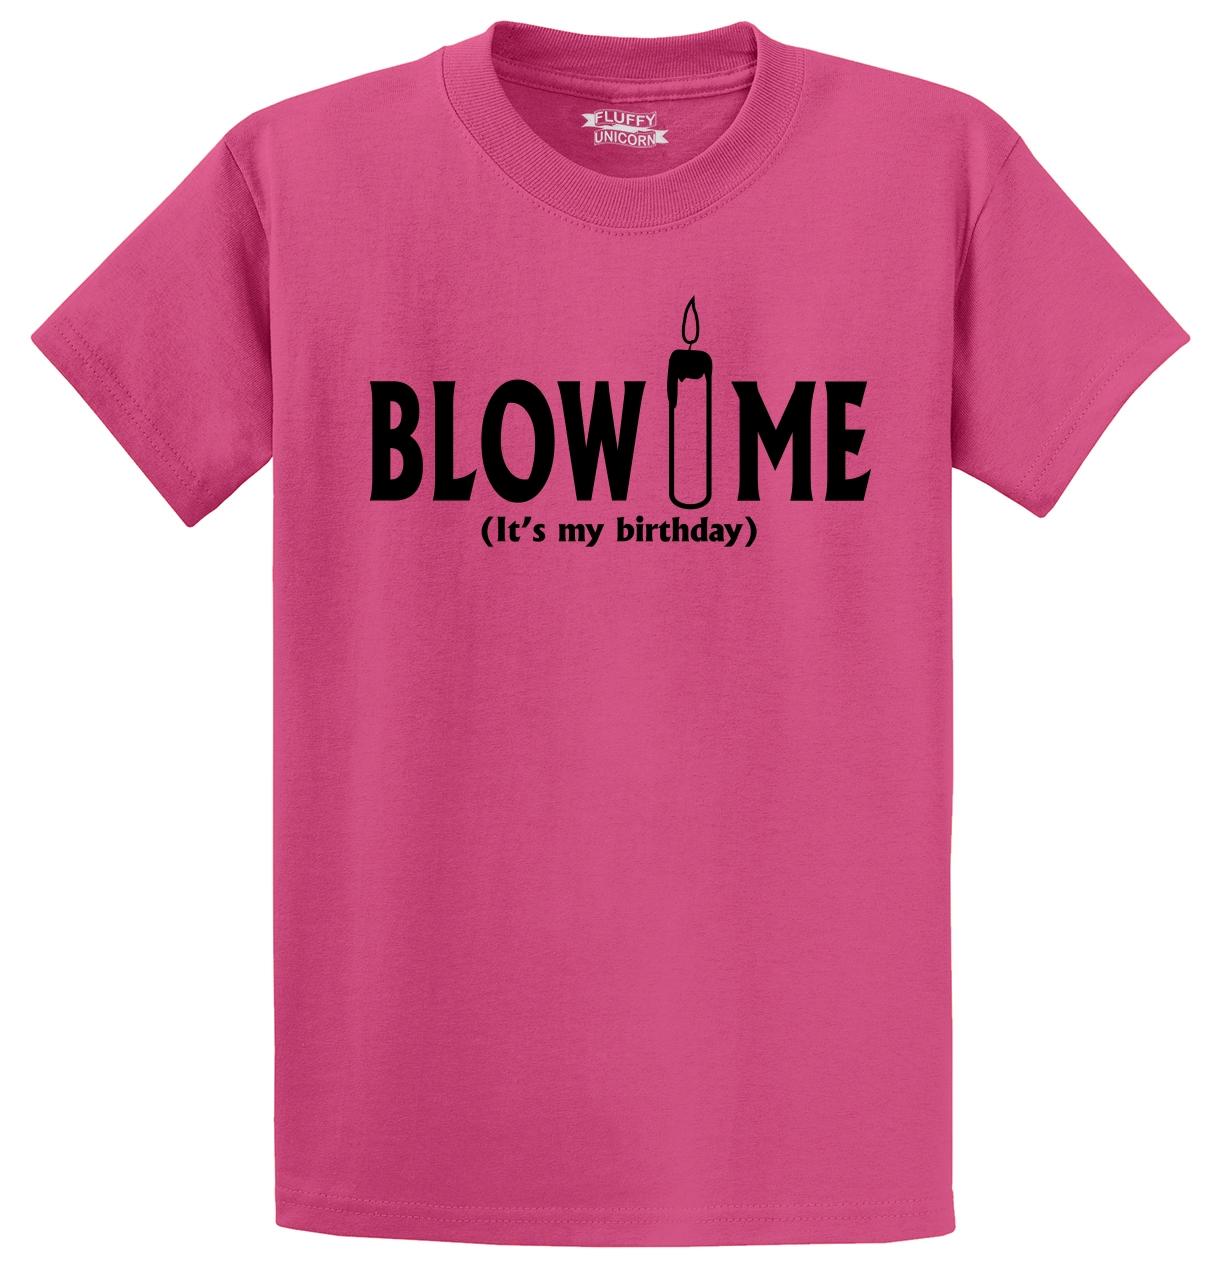 Blow Me Its My Birthday Funny T Shirt Cute B Day T Party Tee S 5xl 